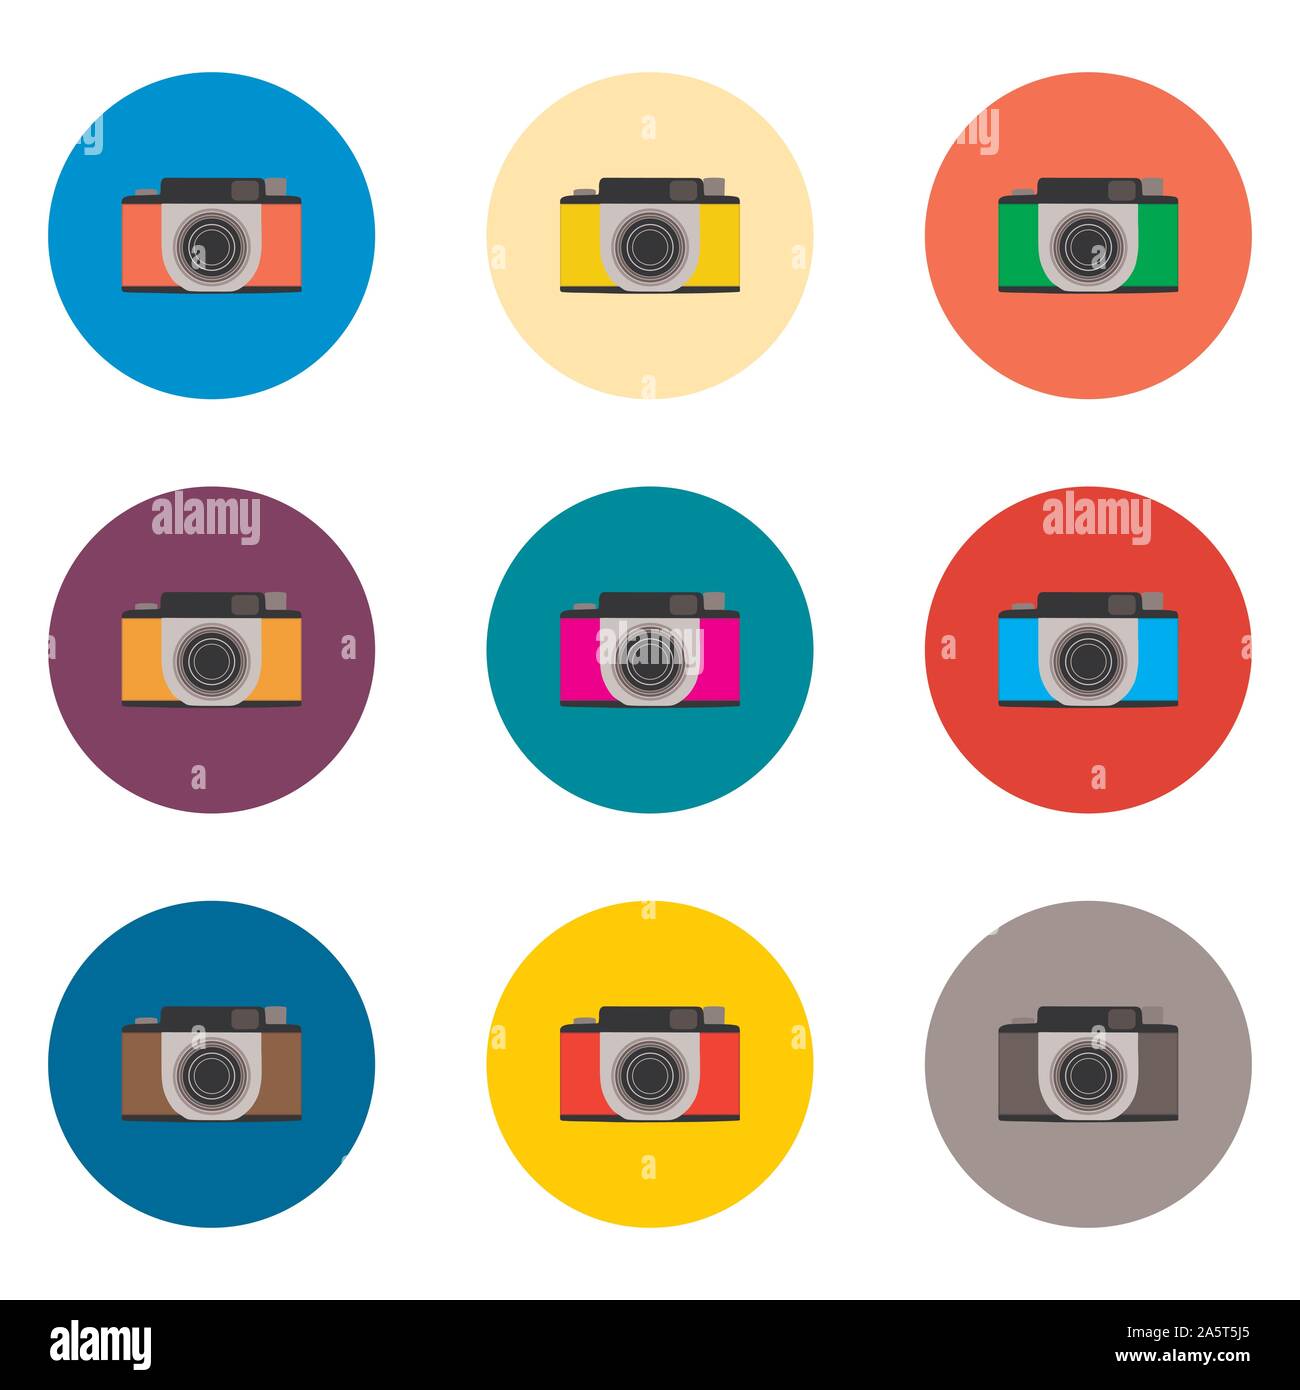 Vector icon illustration logo for set symbols camera with lenses for photo. Camera pattern consisting of flat design with elements mobile web apps. Co Stock Vector